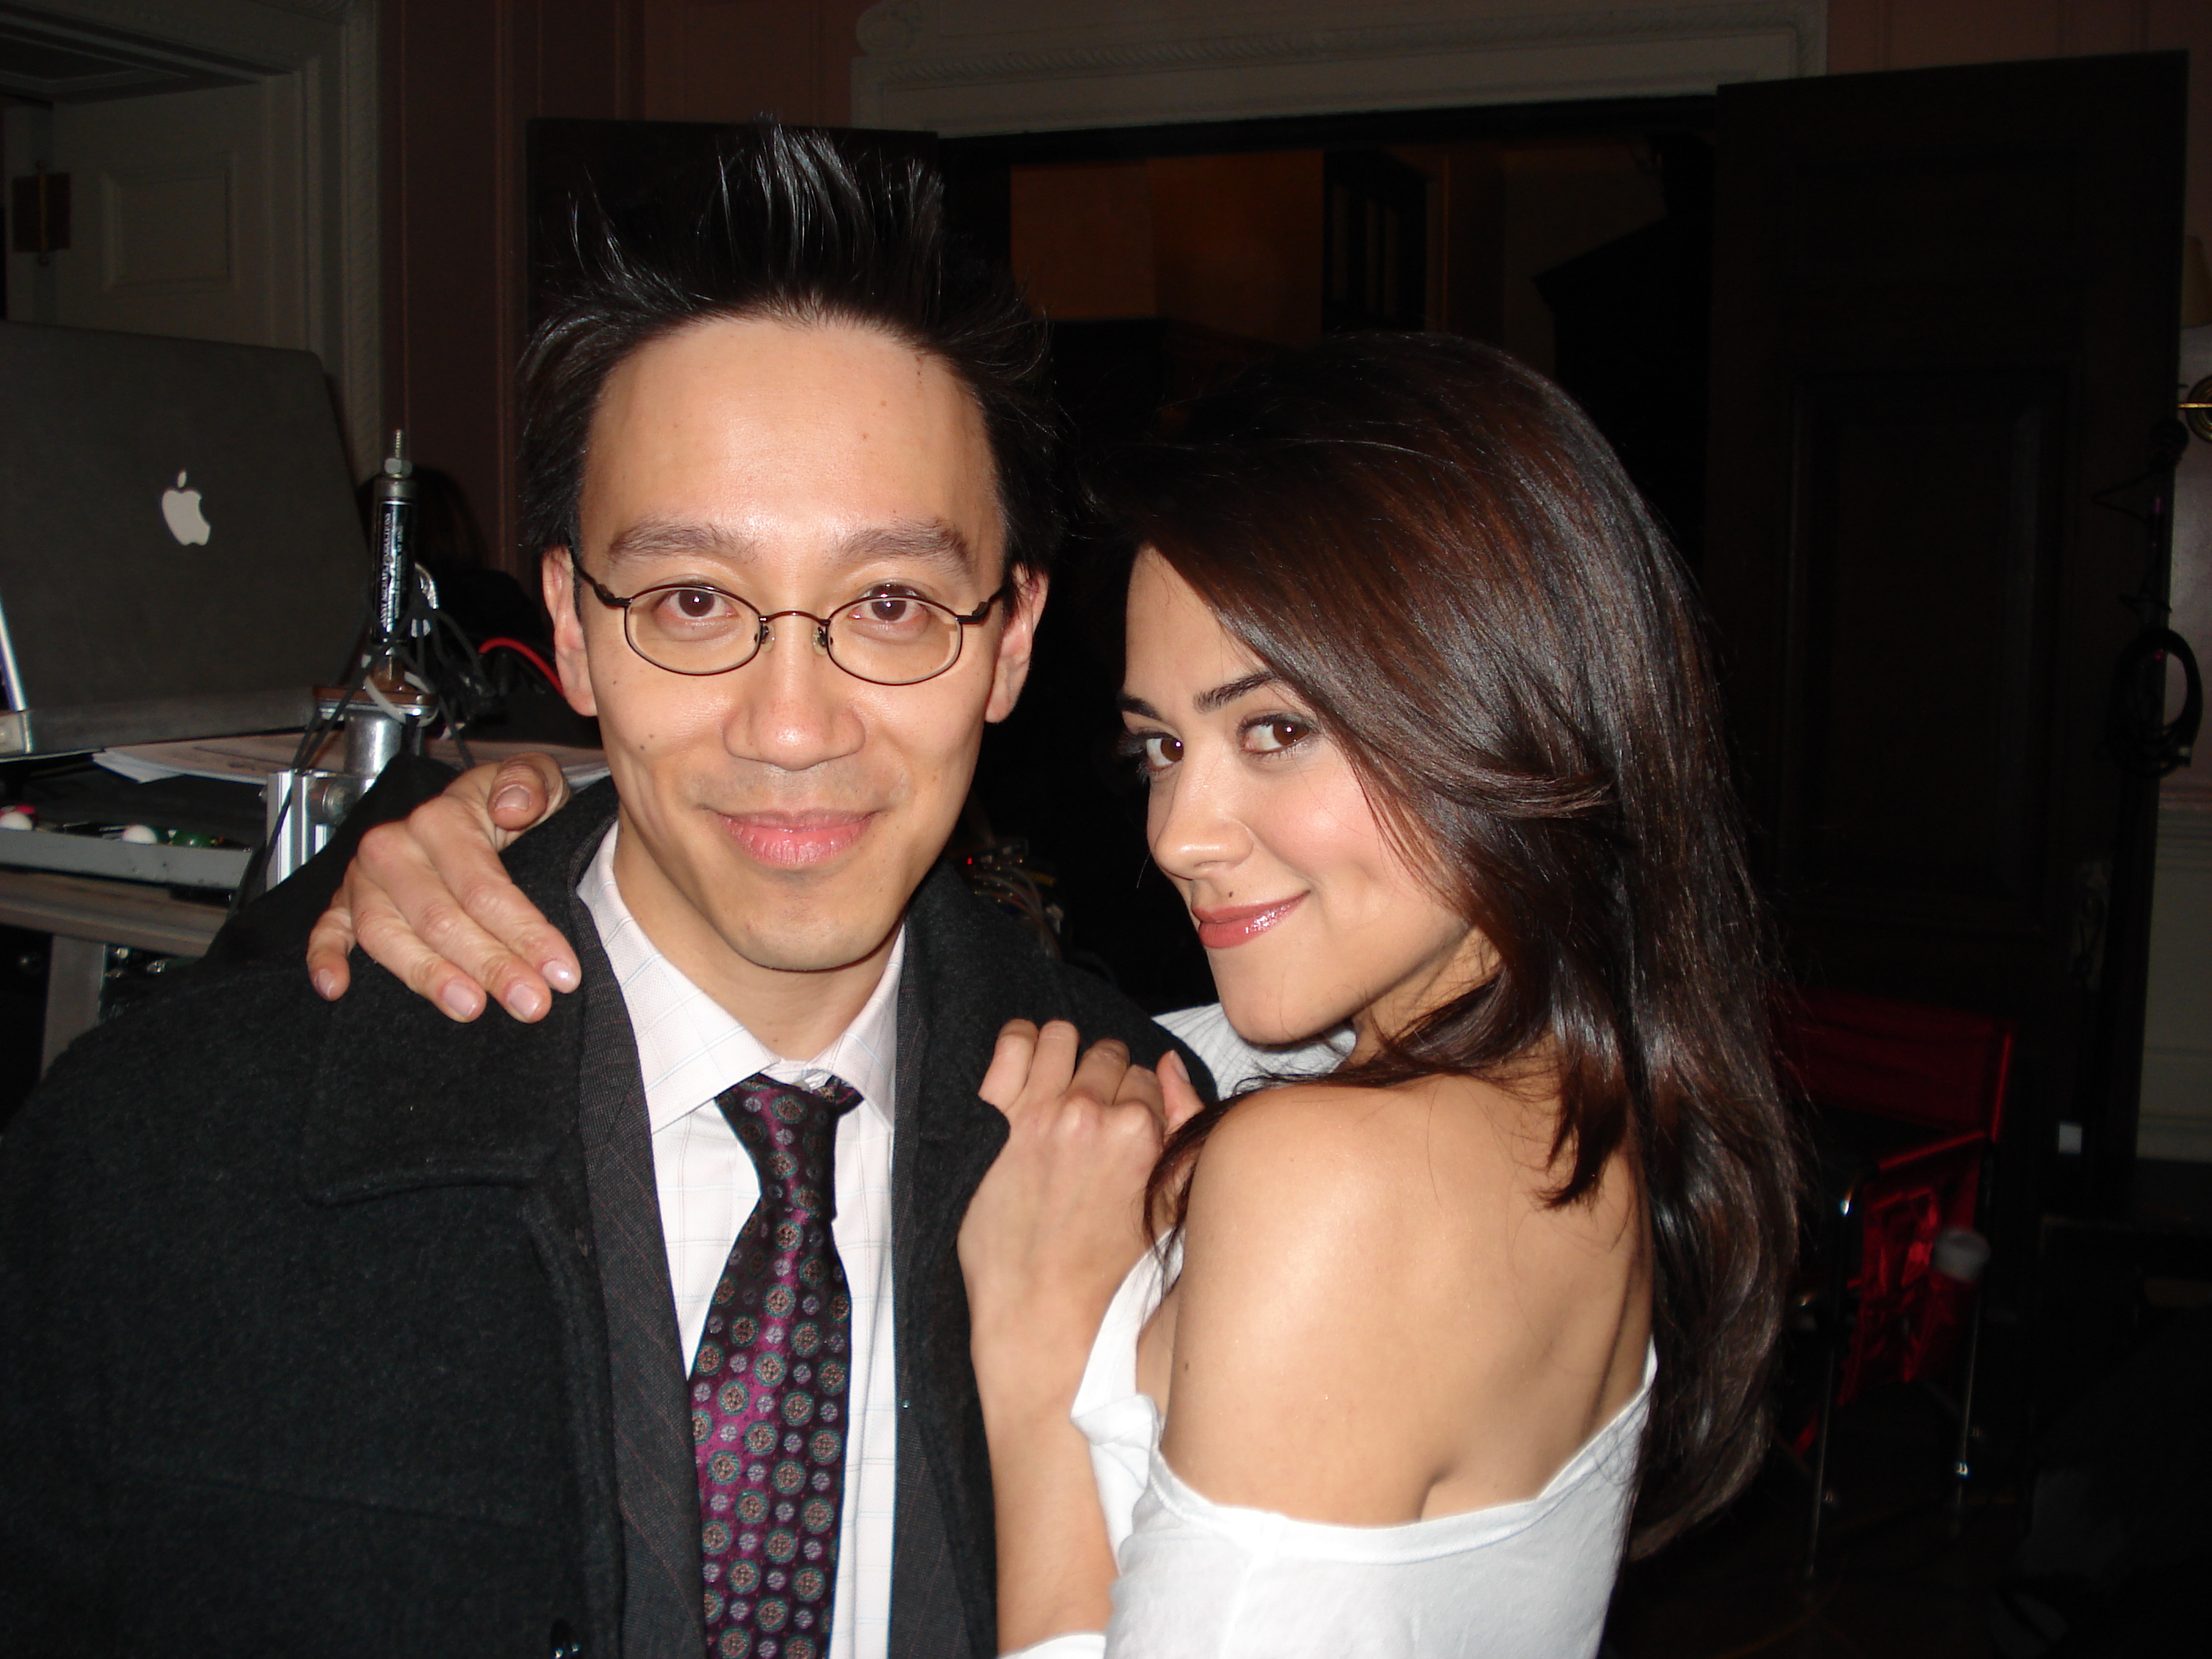 Albert M. Chan and Camille Guaty on the set of Ghosts of Girlfriends Past